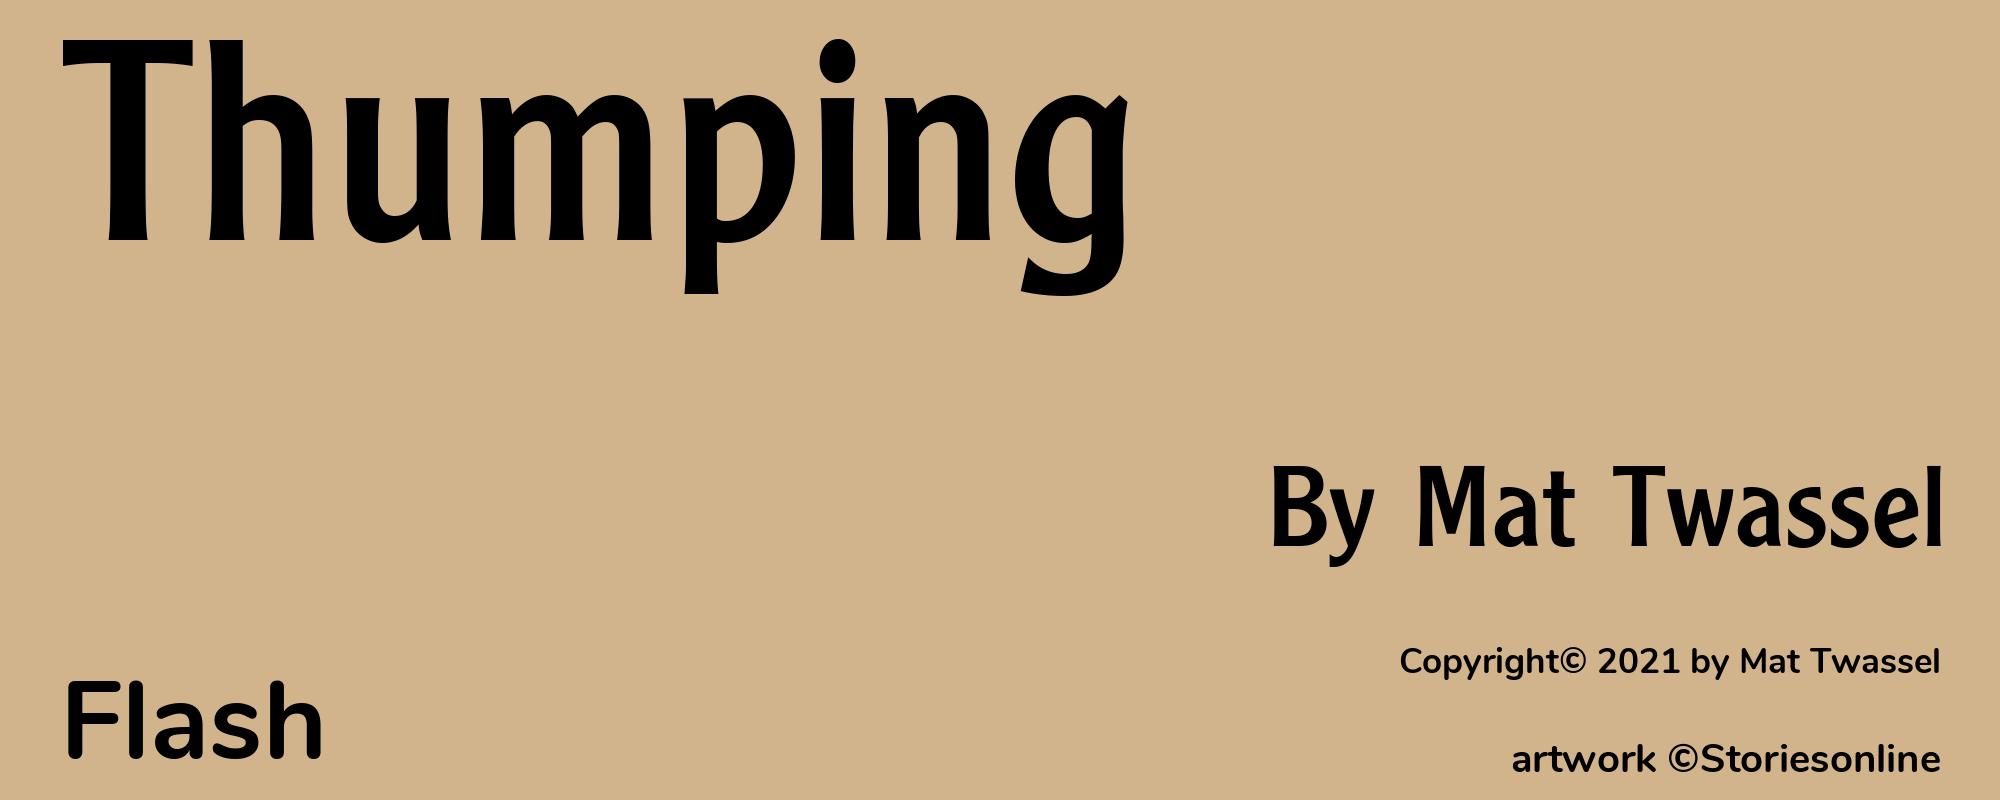 Thumping - Cover